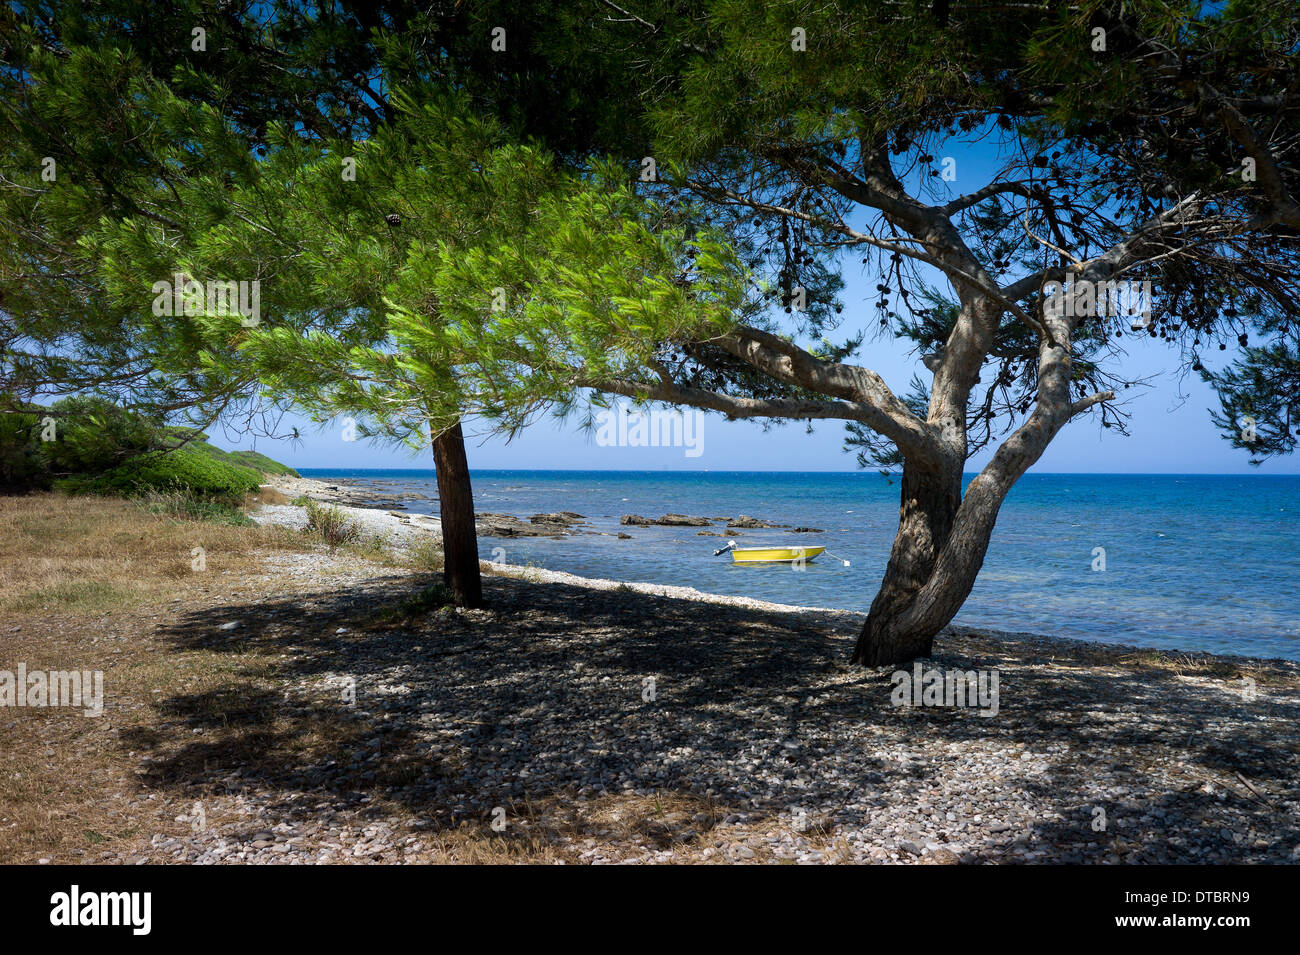 Looking towards the sea with pine trees in Sardinia Stock Photo